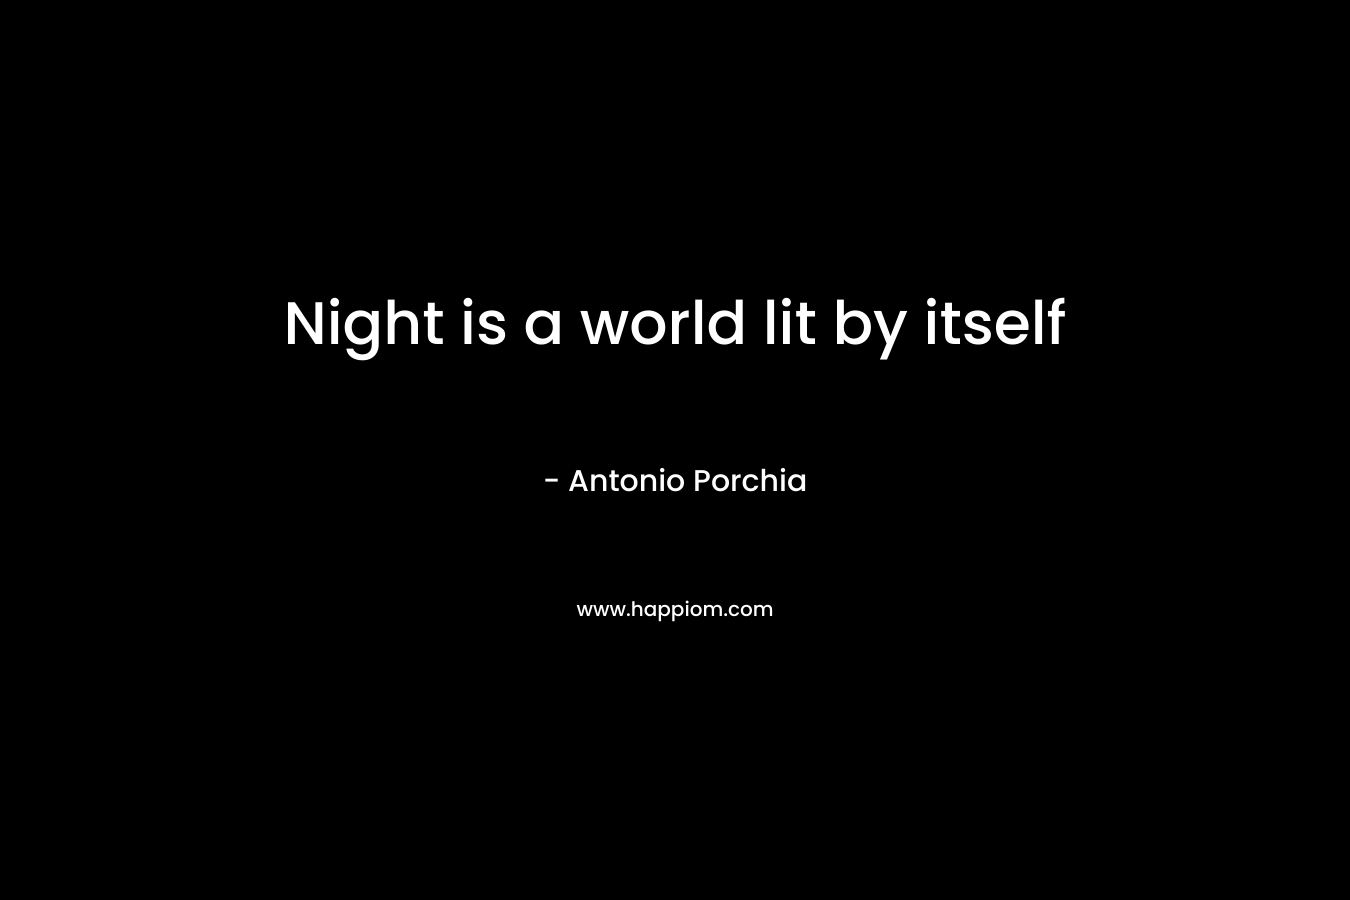 Night is a world lit by itself